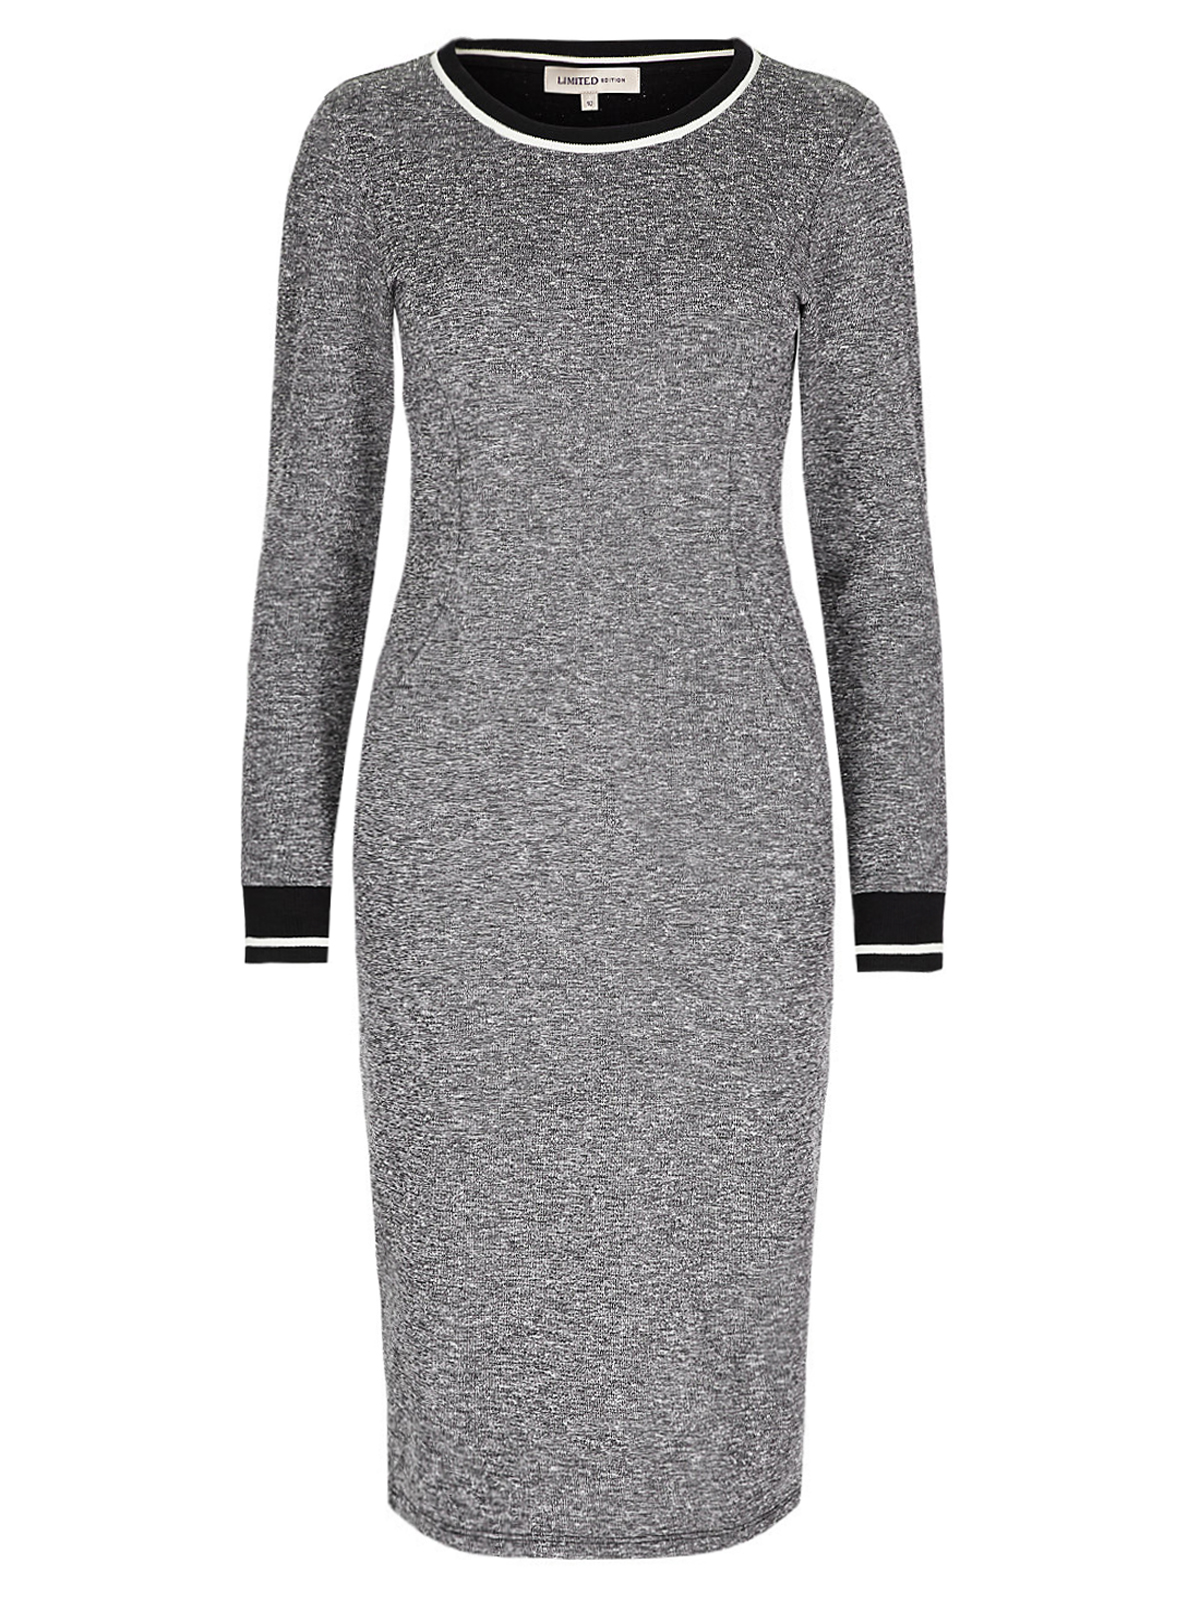 Marks and spencer bodycon dresses under 10